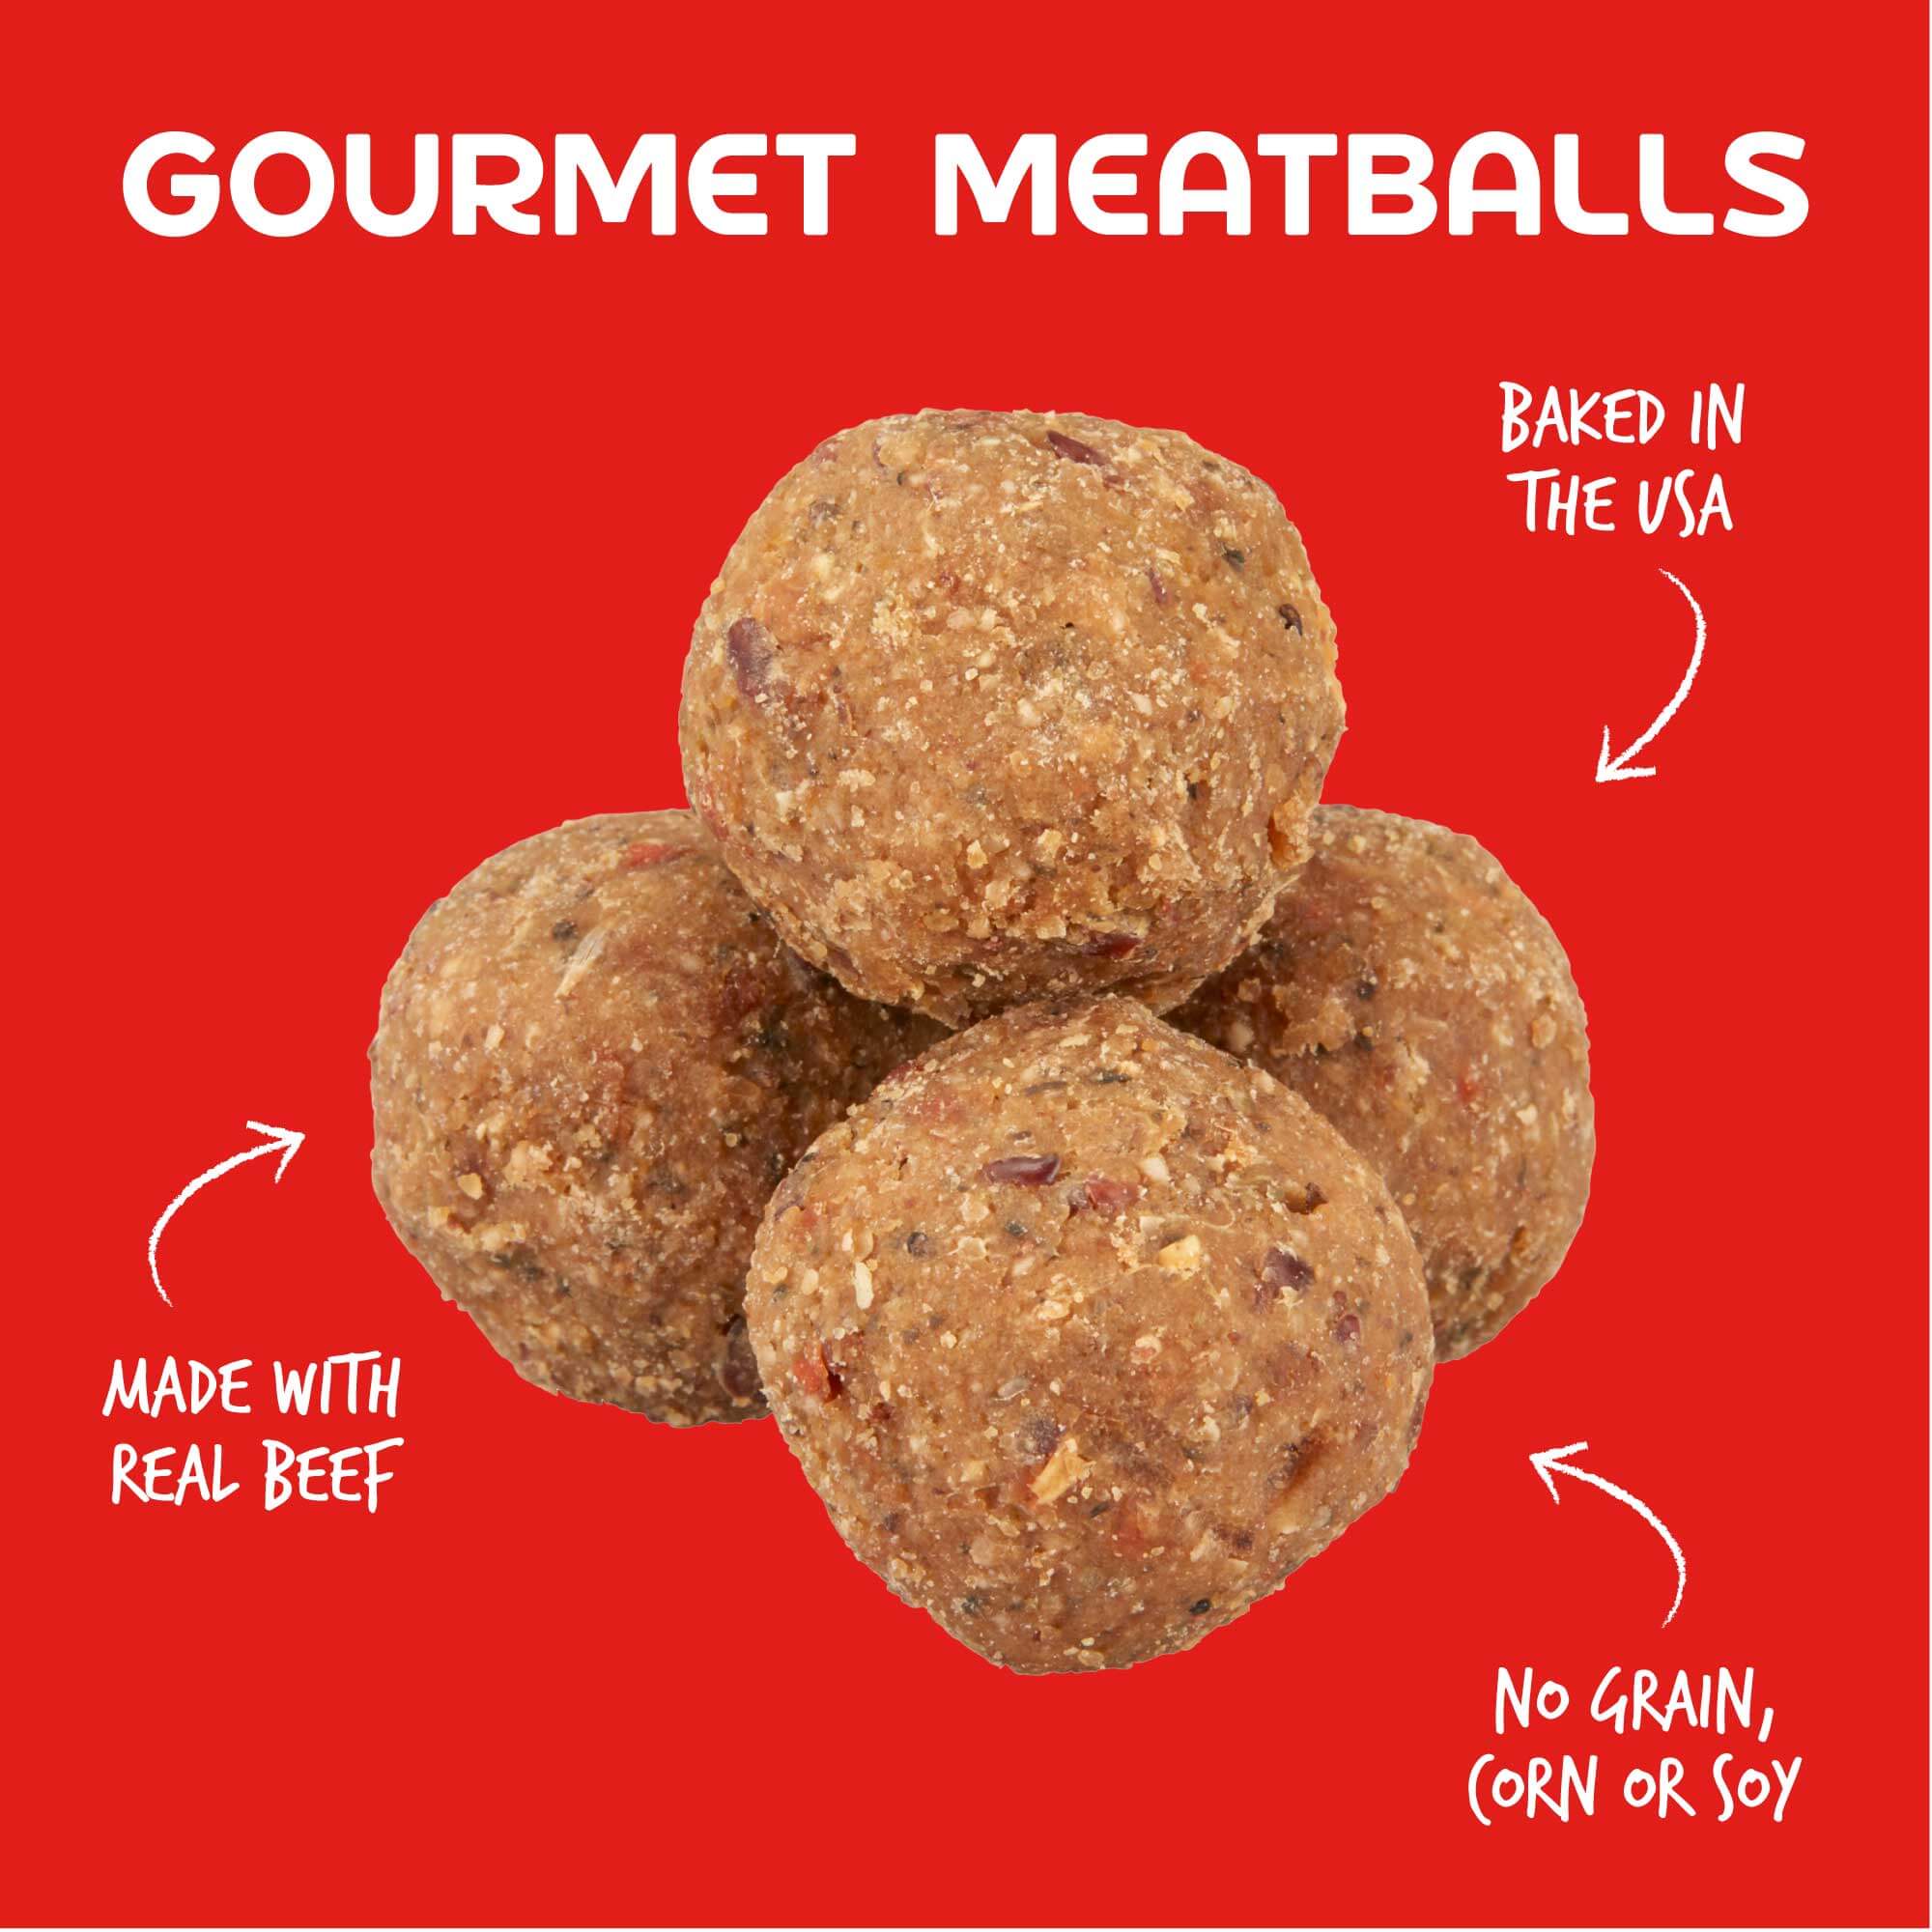 Cloud Star Wag More Bark Less Meat Balls Grain Free Soft & Chewy Dog Treats with Real Beef, 14oz